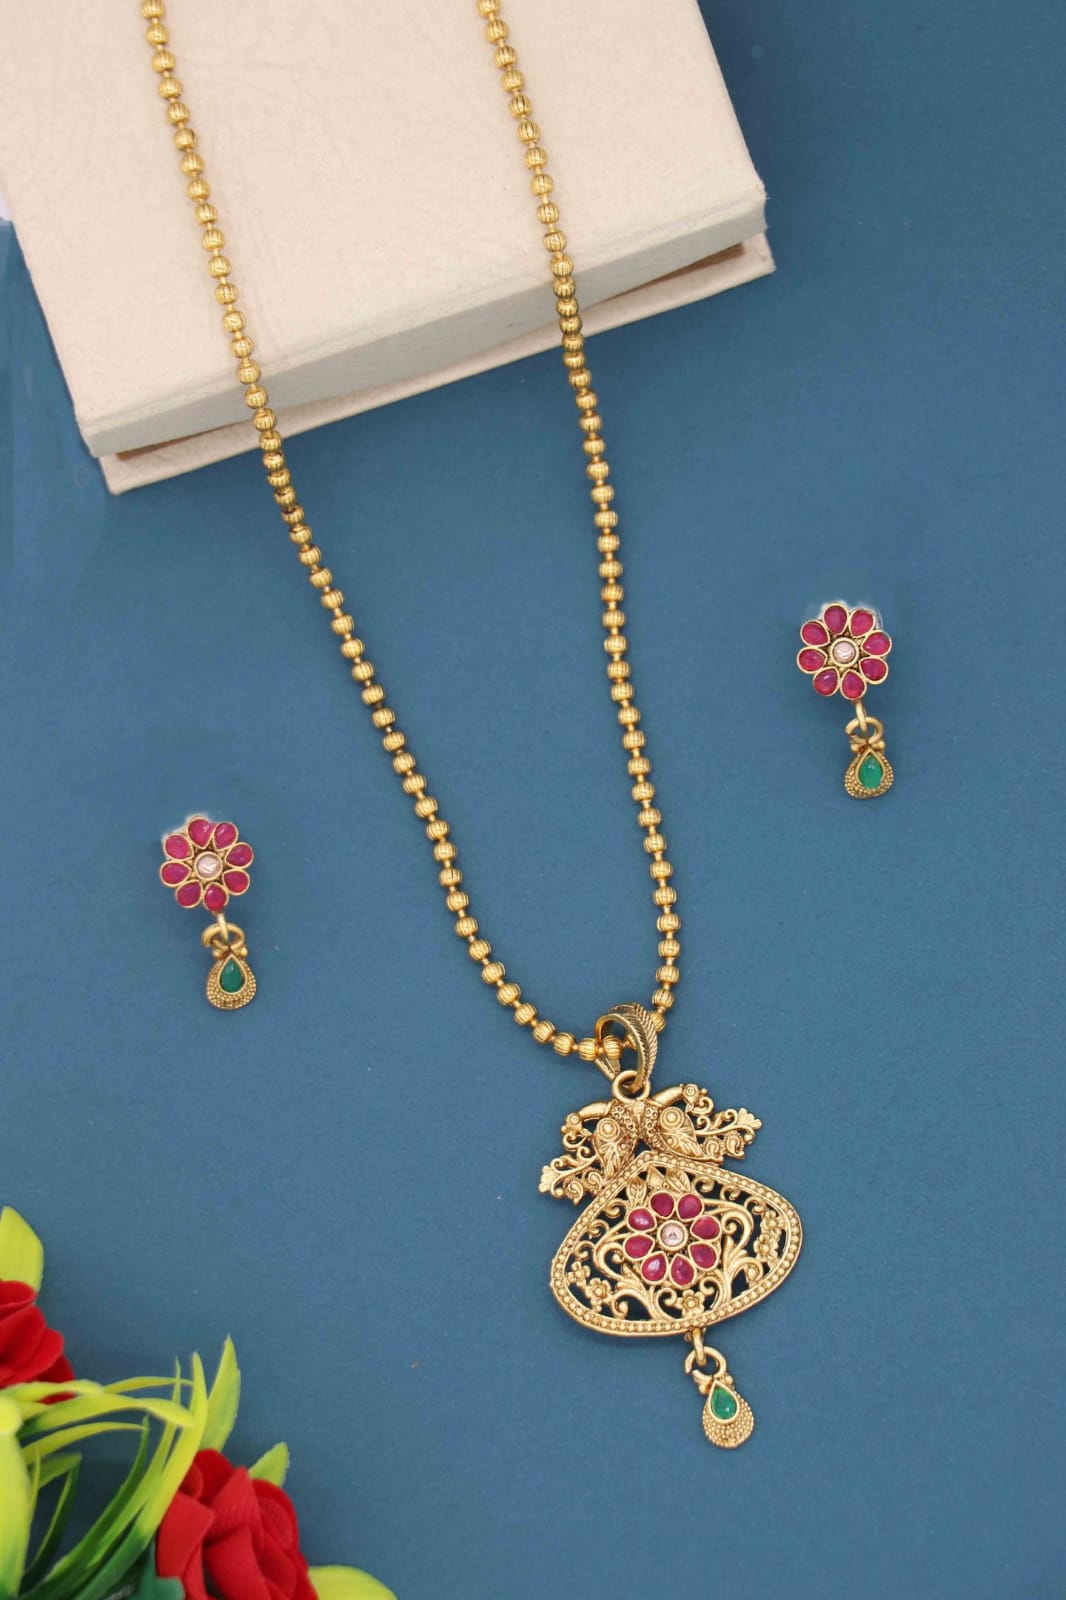 Traditional Pendant Set with Stud Earrings and Bead Chain for Women and Girls